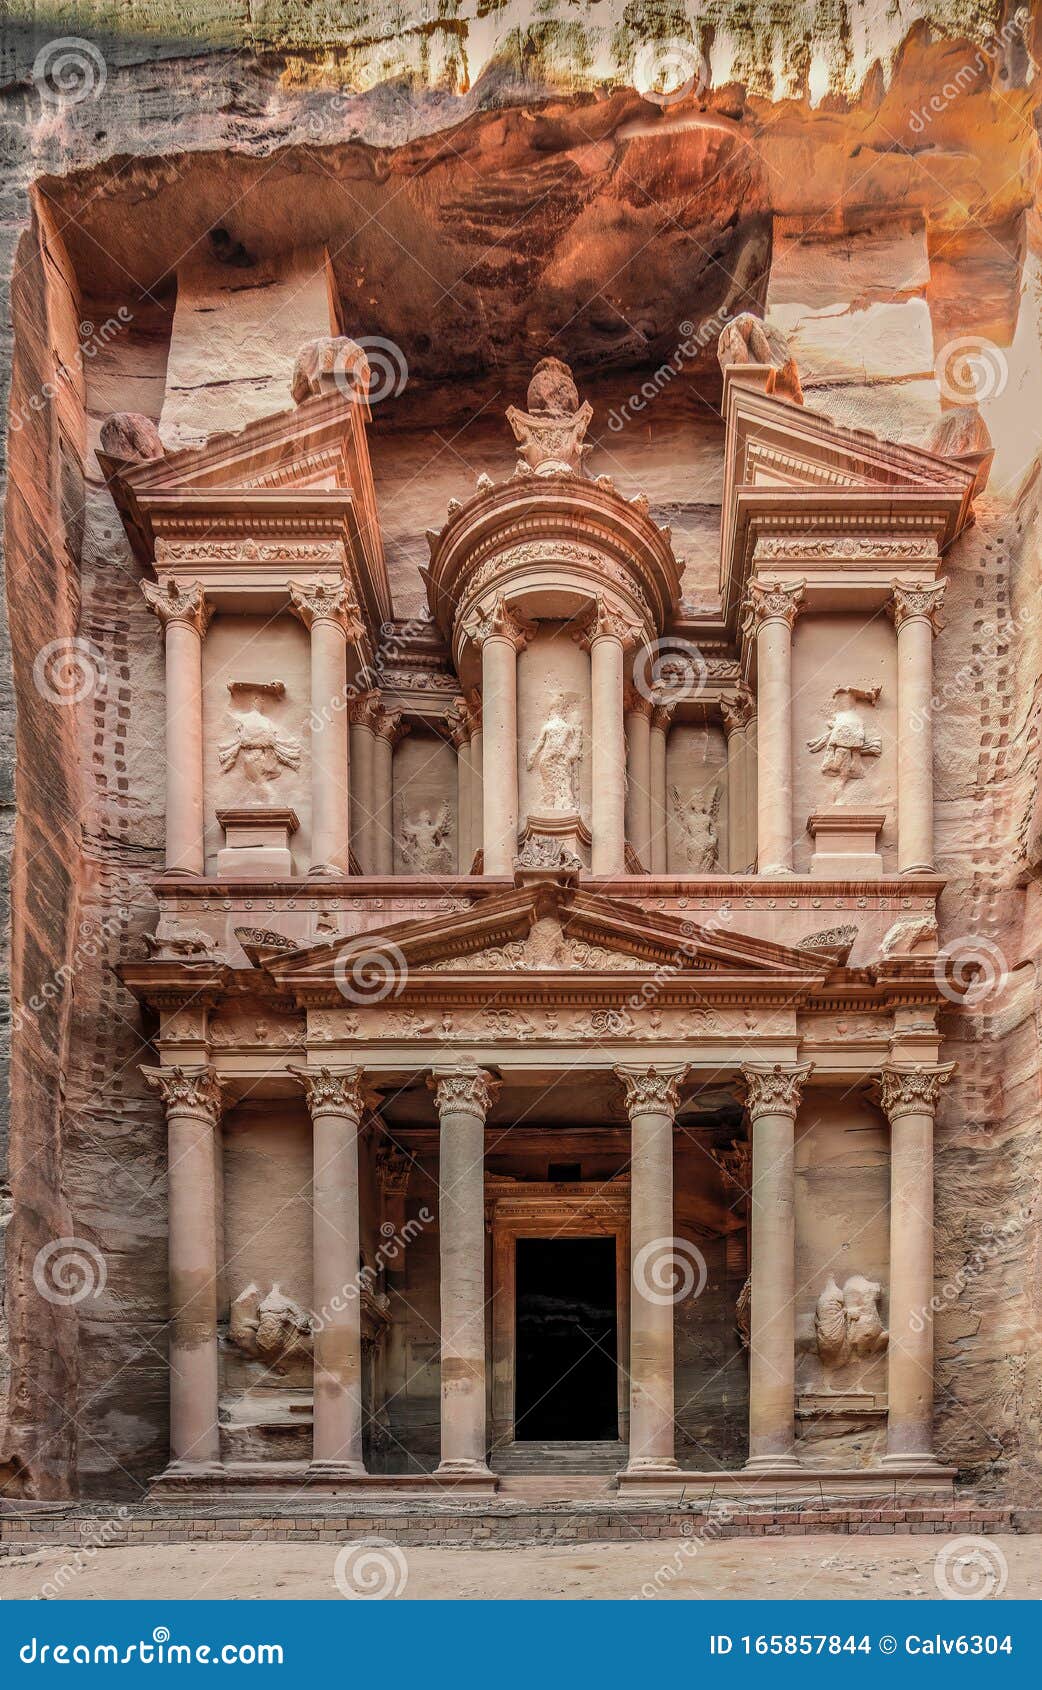 The Treasury Building of Petra, Jordan Carved Out of the Sandstone Cliffs.  Stock Photo - Image of arabian, carved: 165857844